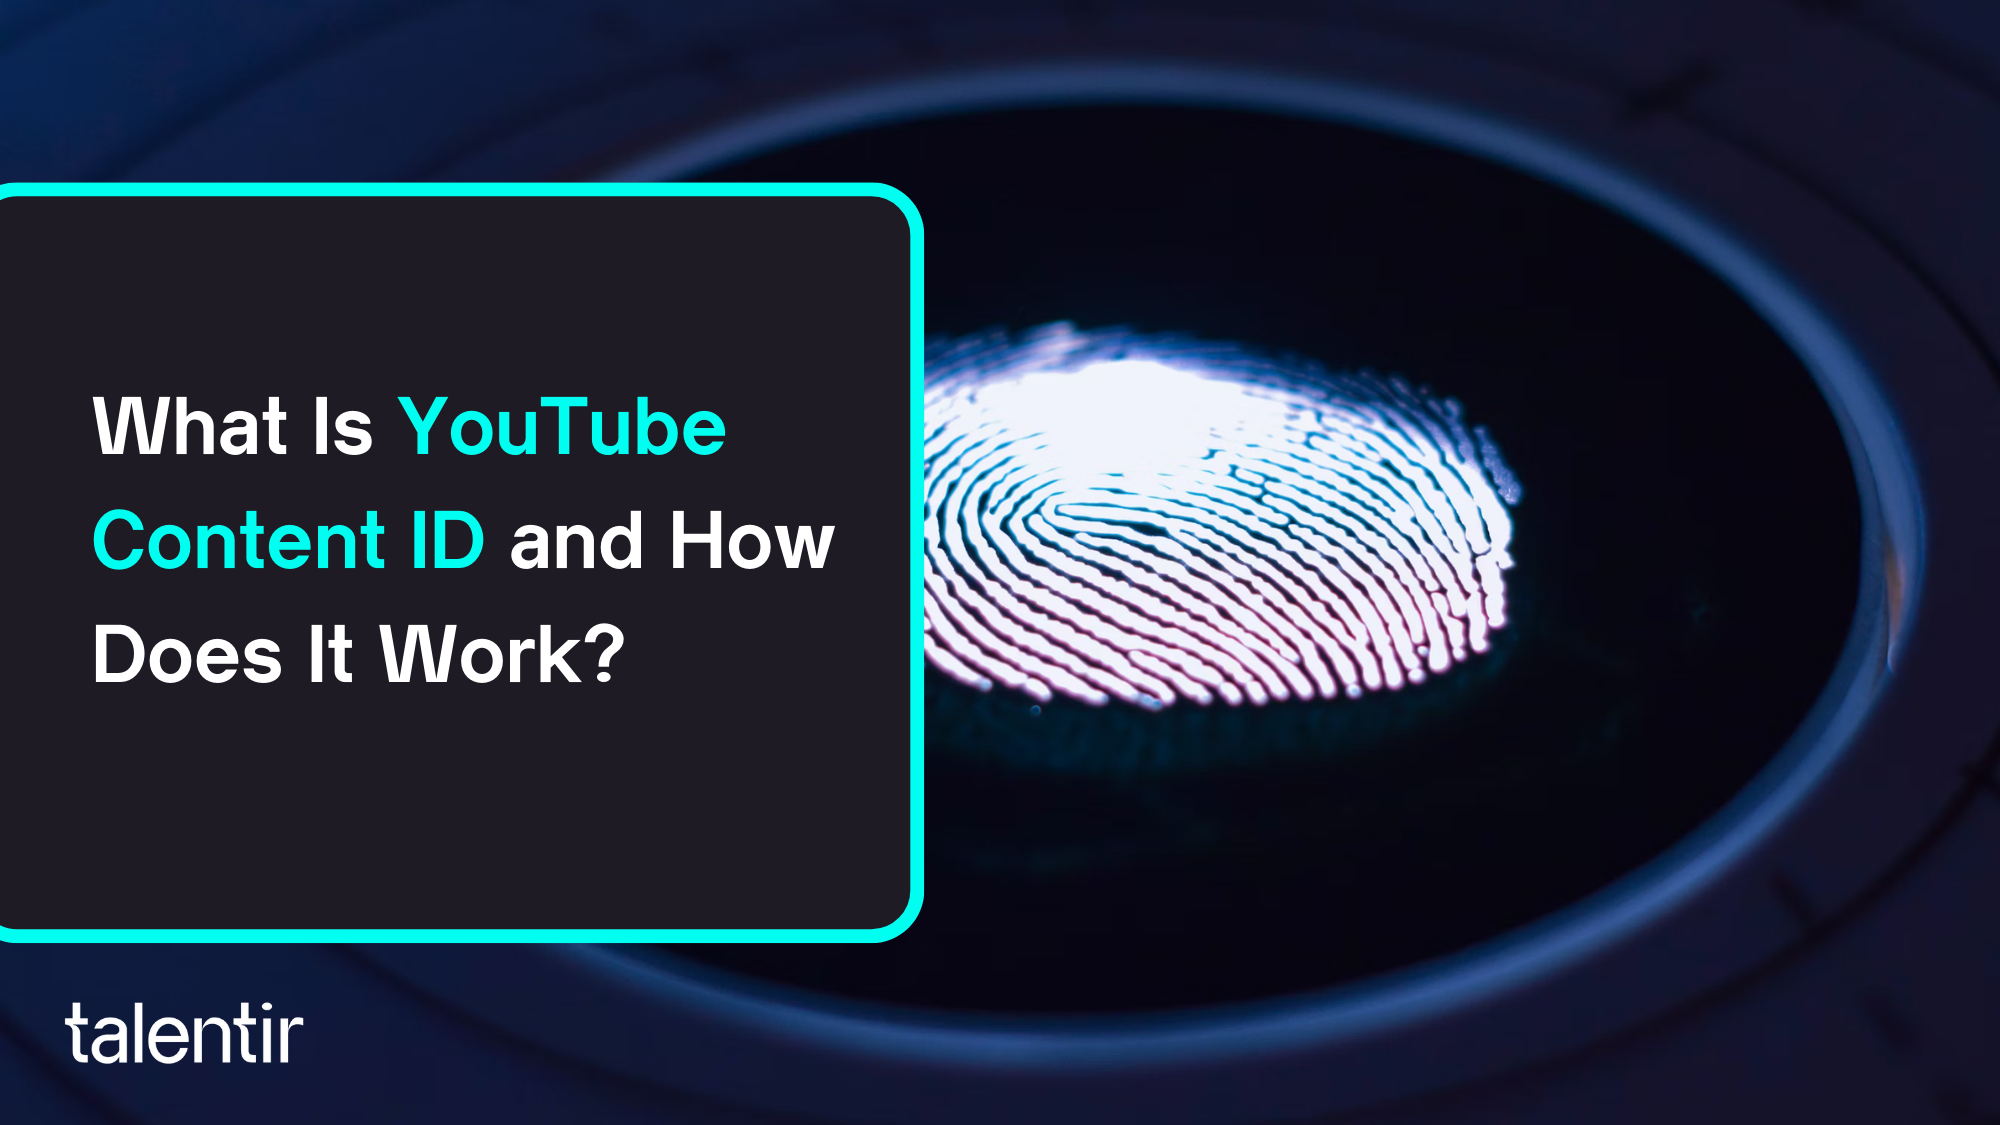 What is YouTube content ID? It allows you to identify, claim, monetize, and prevent unauthorized use of your content. Learn how it works and how you can use it.